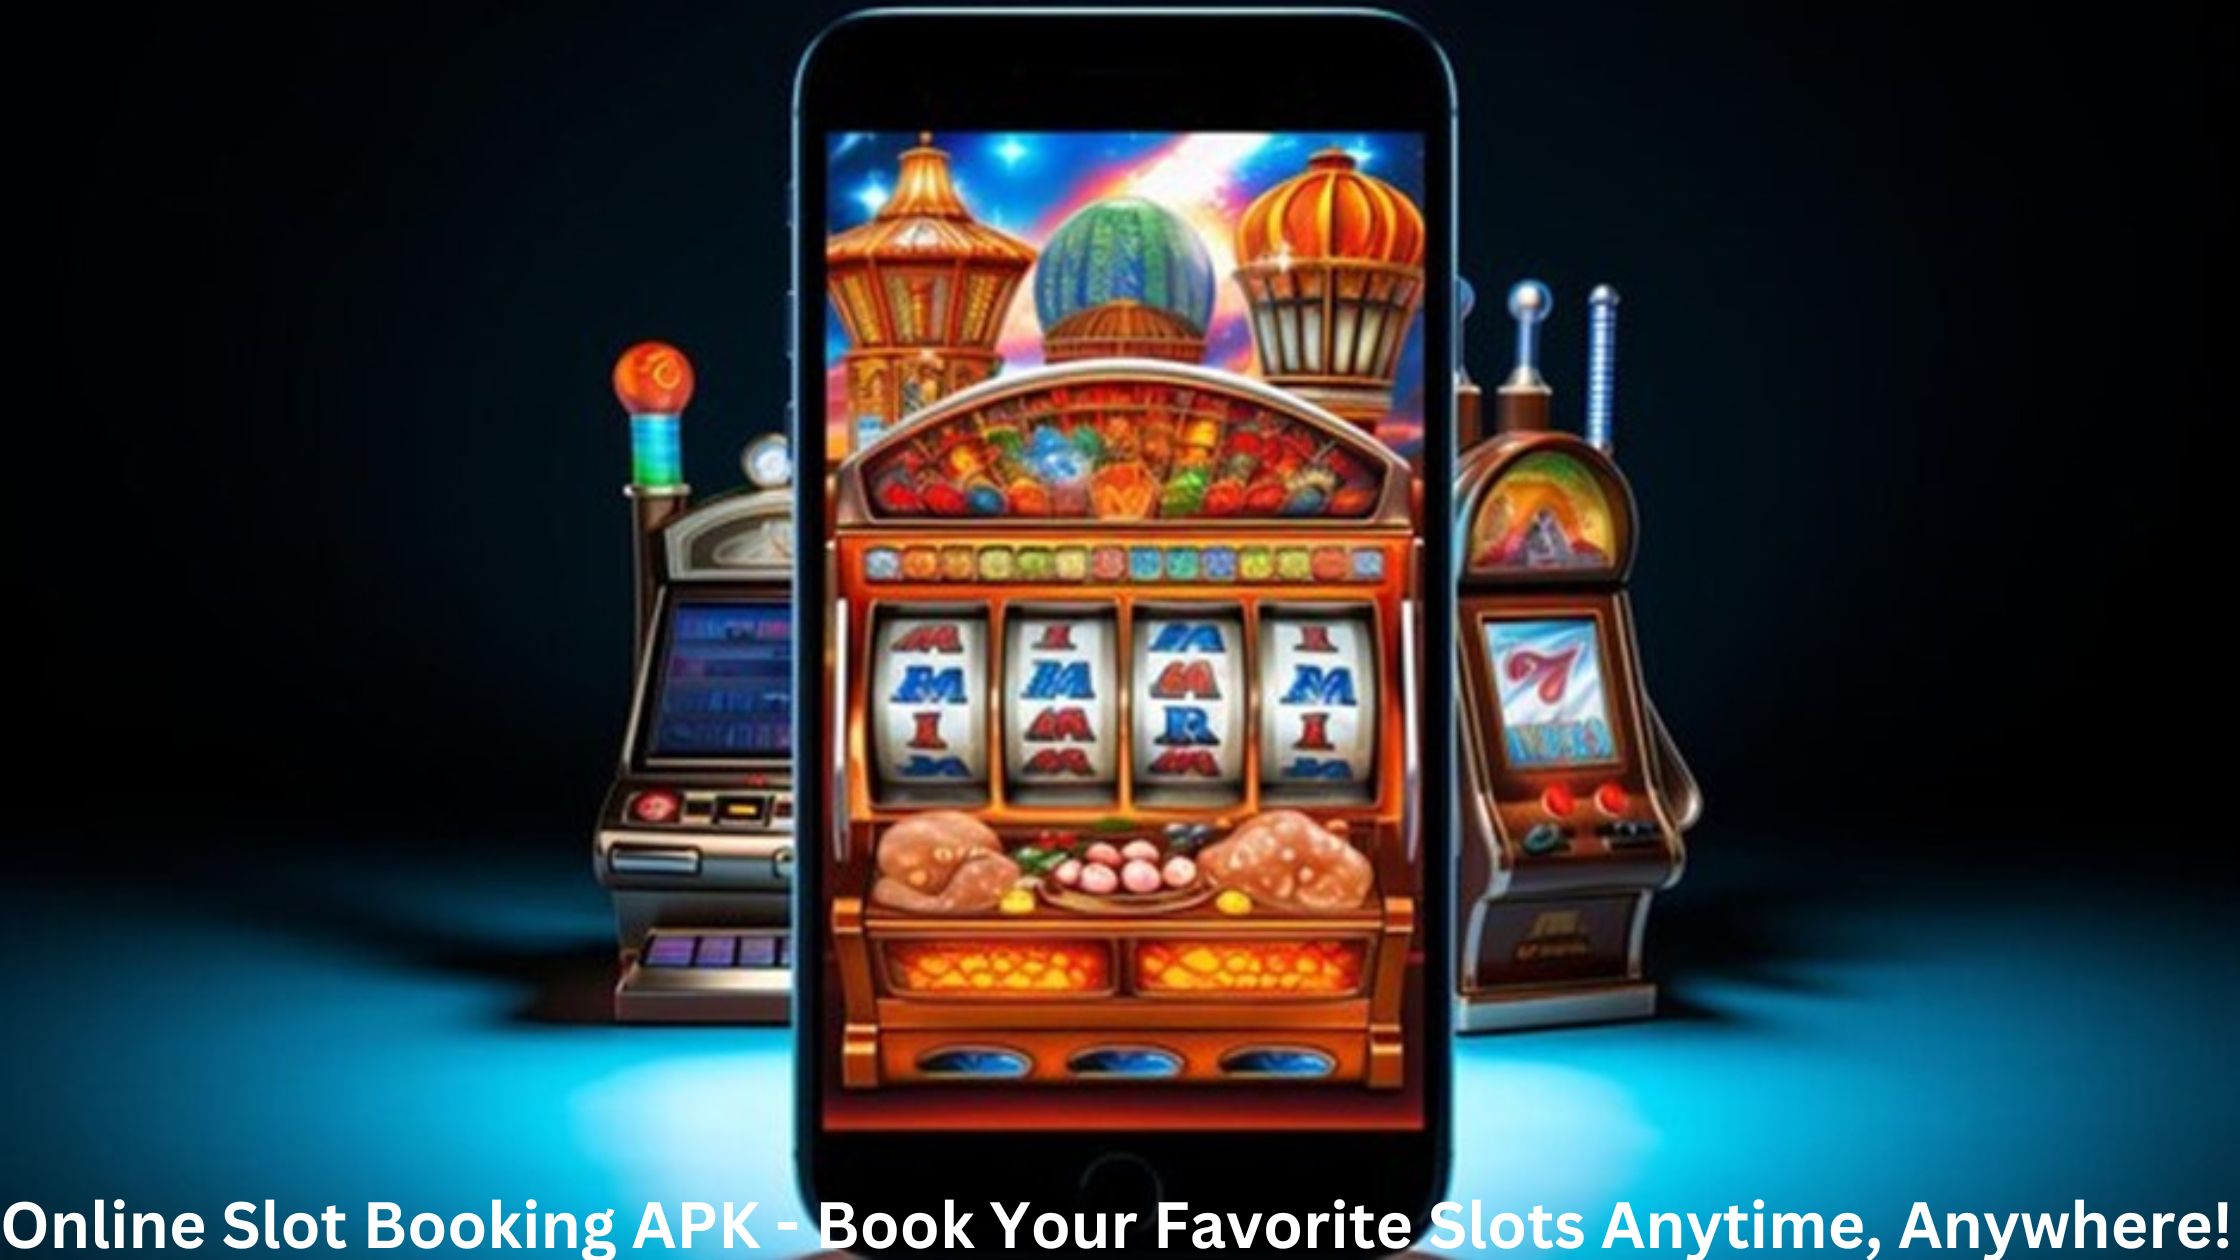 Online Slot Booking APK- Book Your Favorite Slots Anytime!